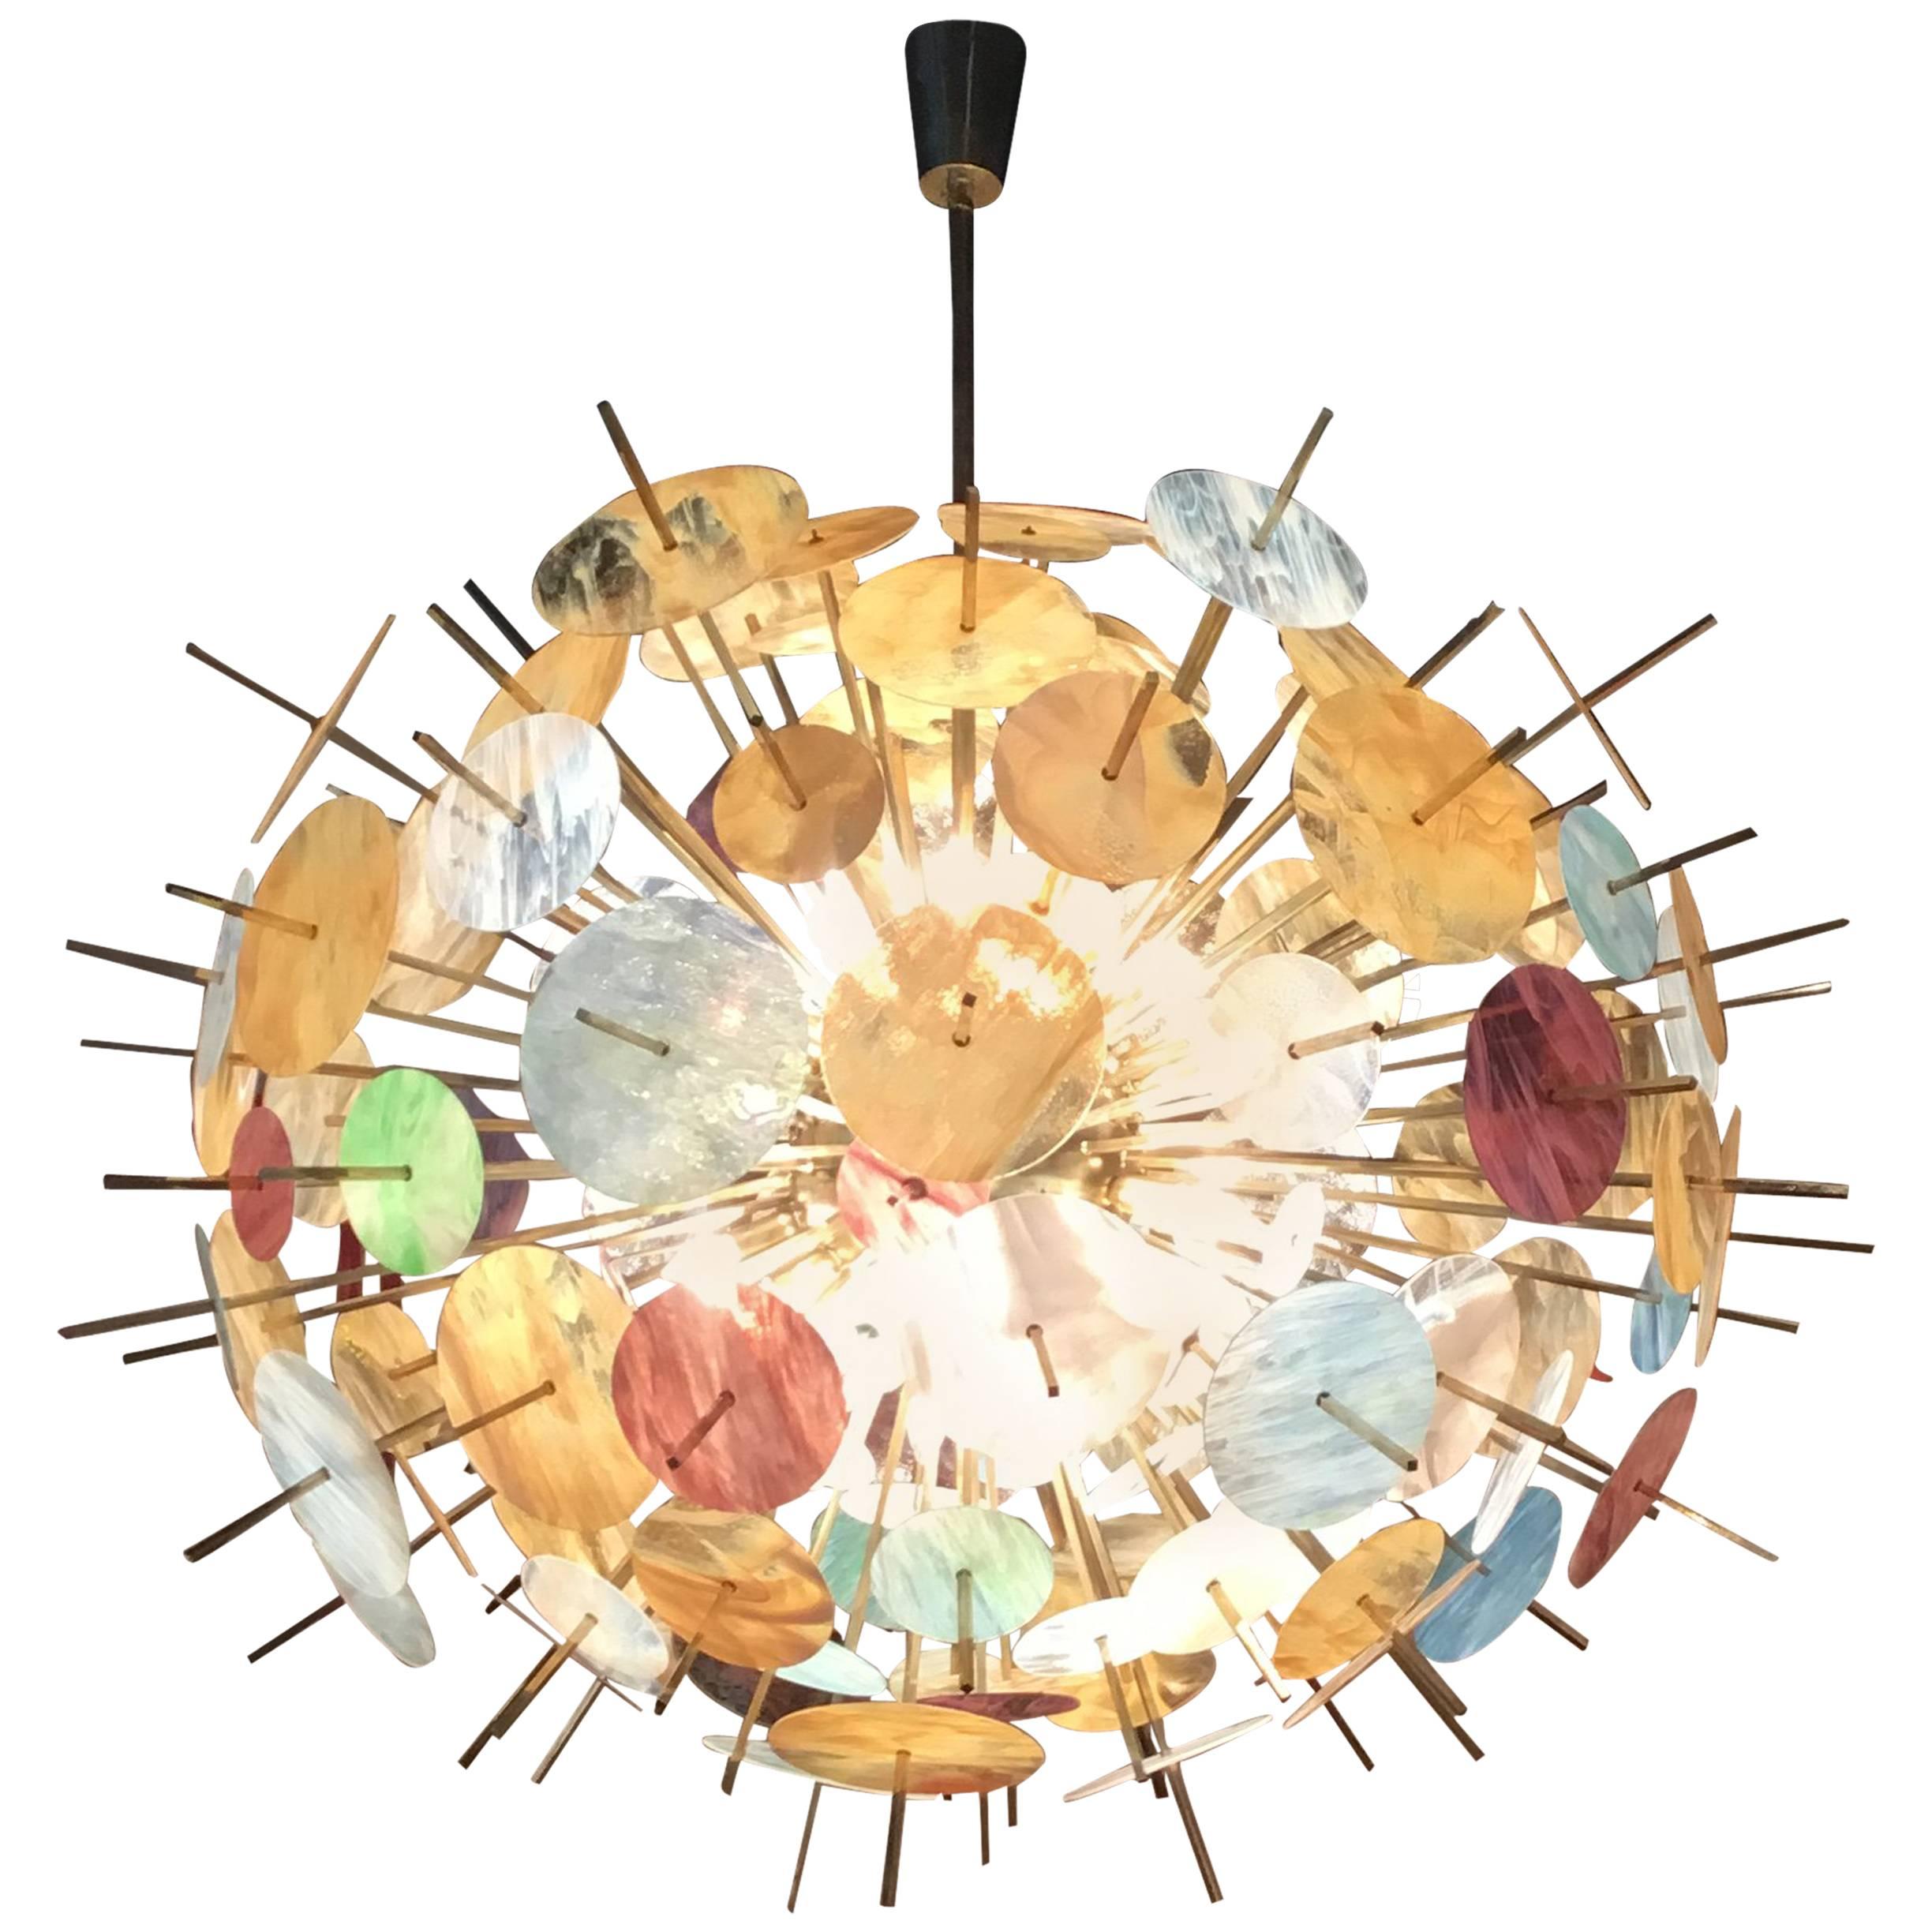 "Big Bang" Murano Glass Chandelier, Made in Italy, 2000